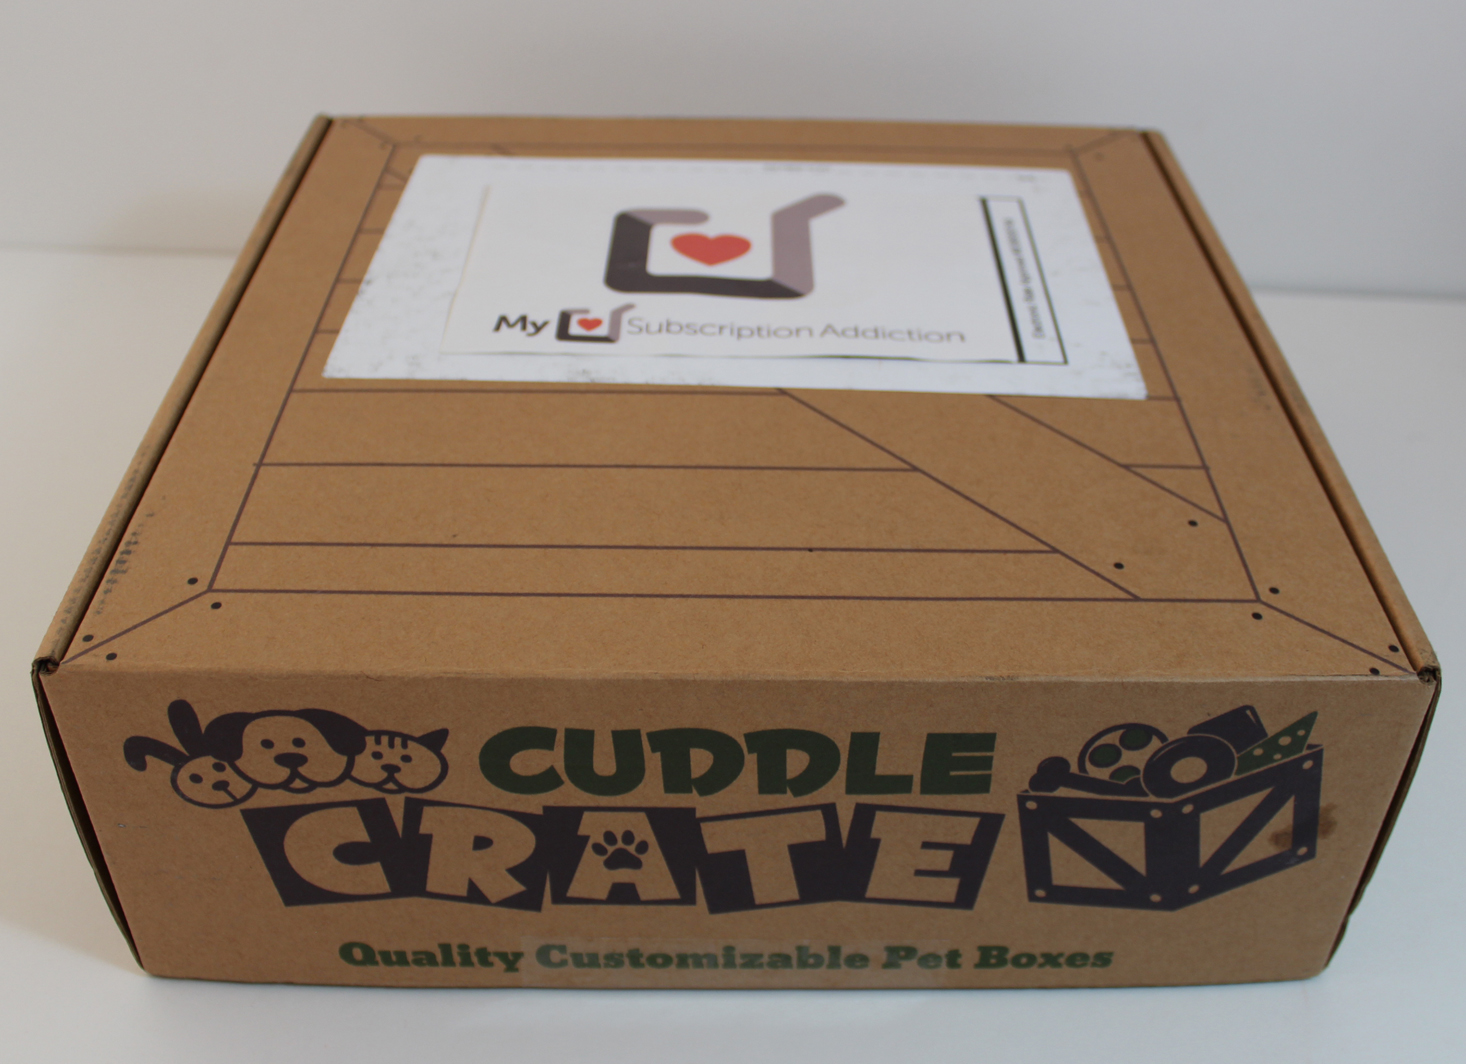 Cuddle Crate Cat Box Review + Coupon – September 2017